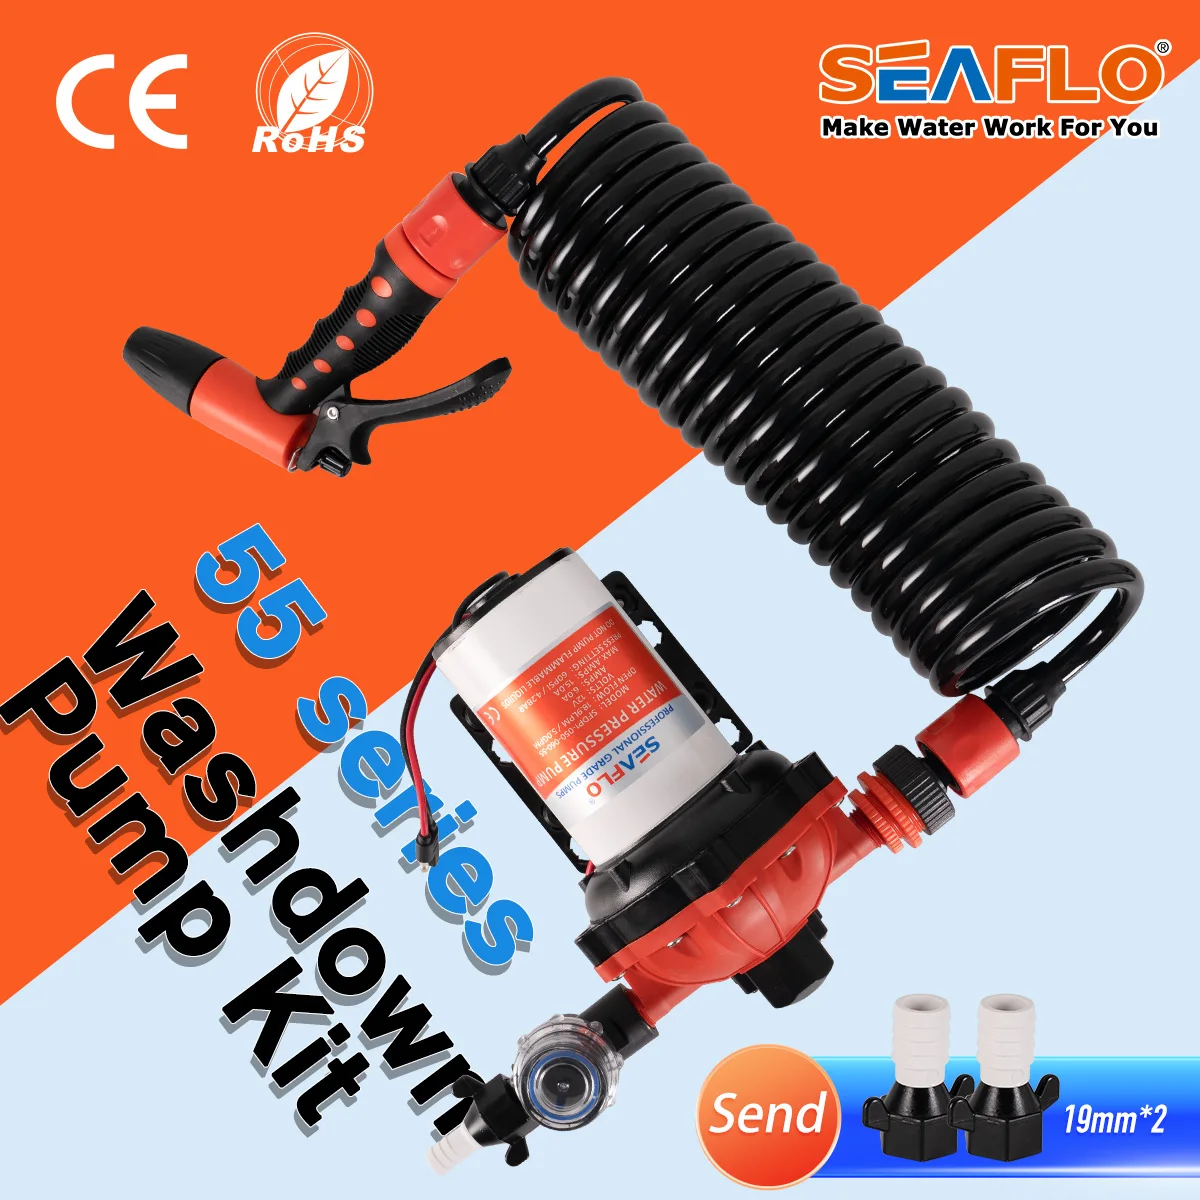 

SEAFLO 55 Series Diaphragm Water Pump Our Heavy-duty Washdown Kit 5.0GPM 60PSI 12V with 6.5m Coiled Hose On-Board